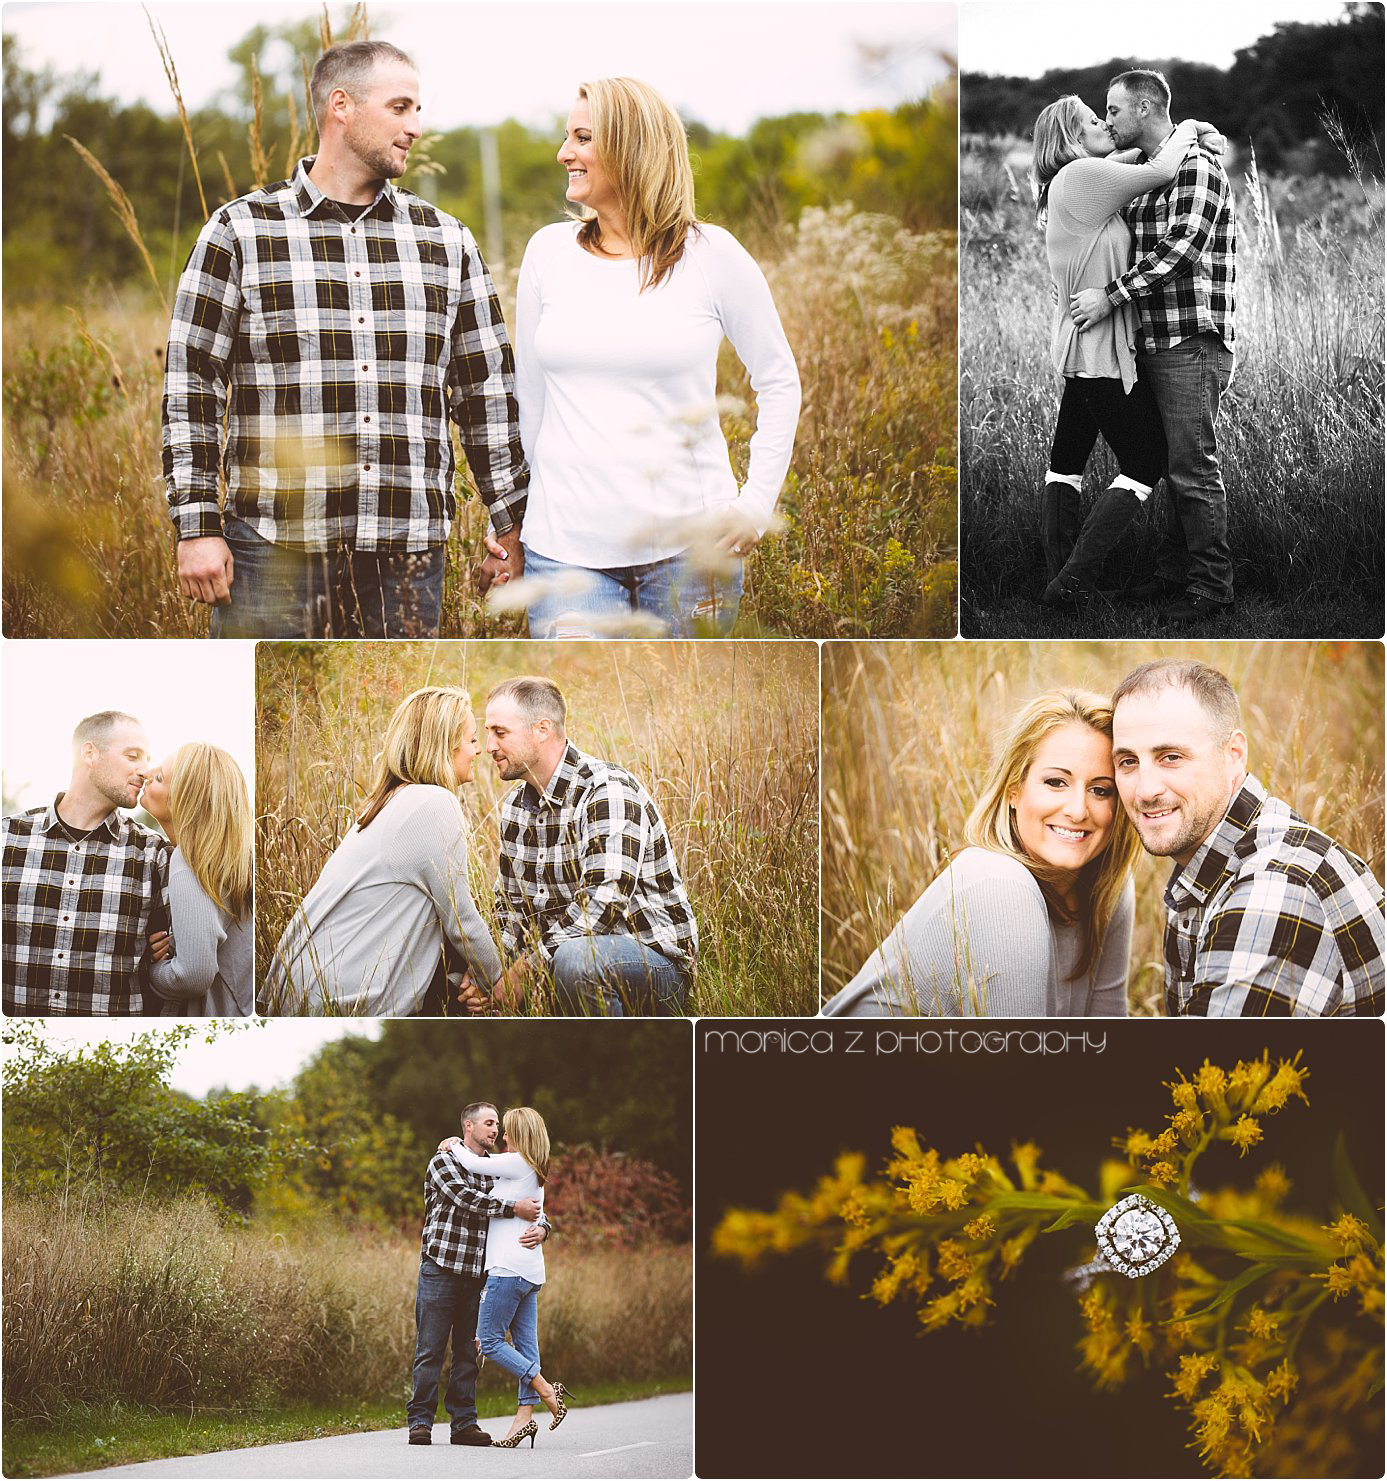 Ashlee & Bryan | Engagement Session | Michigan City IN